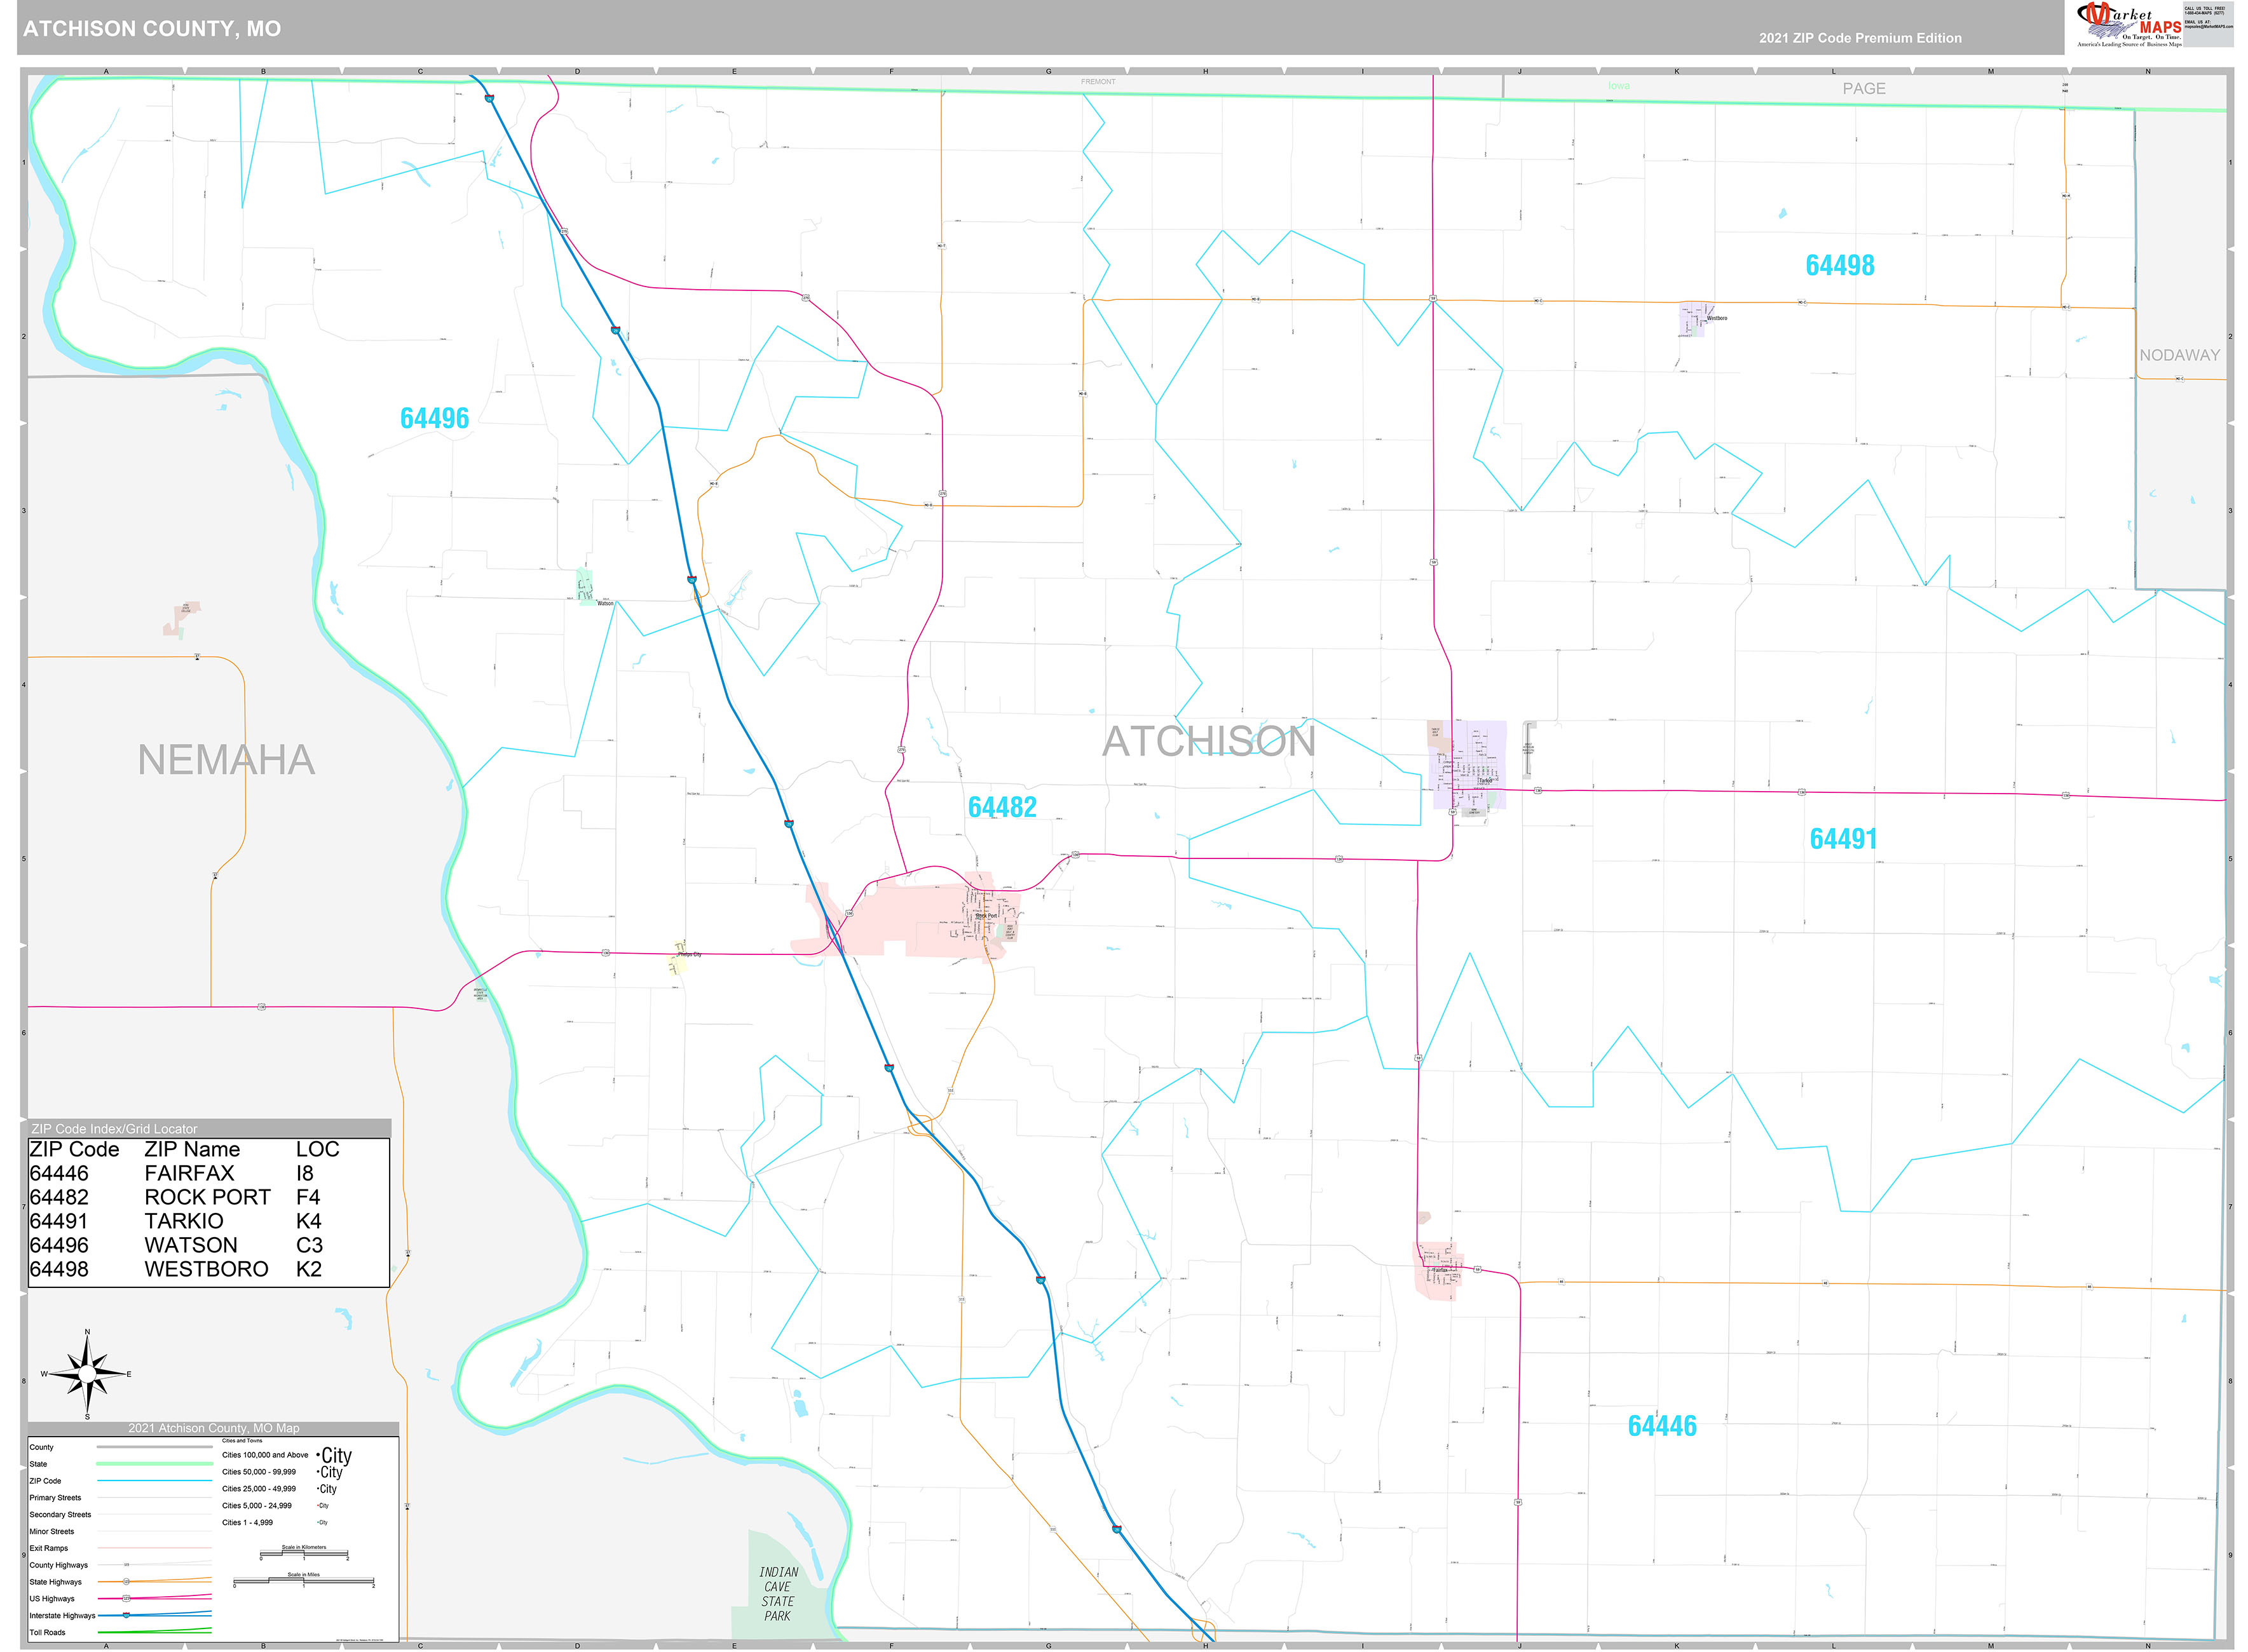 Atchison County Mo Wall Map Color Cast Style By Marketmaps | Images and ...